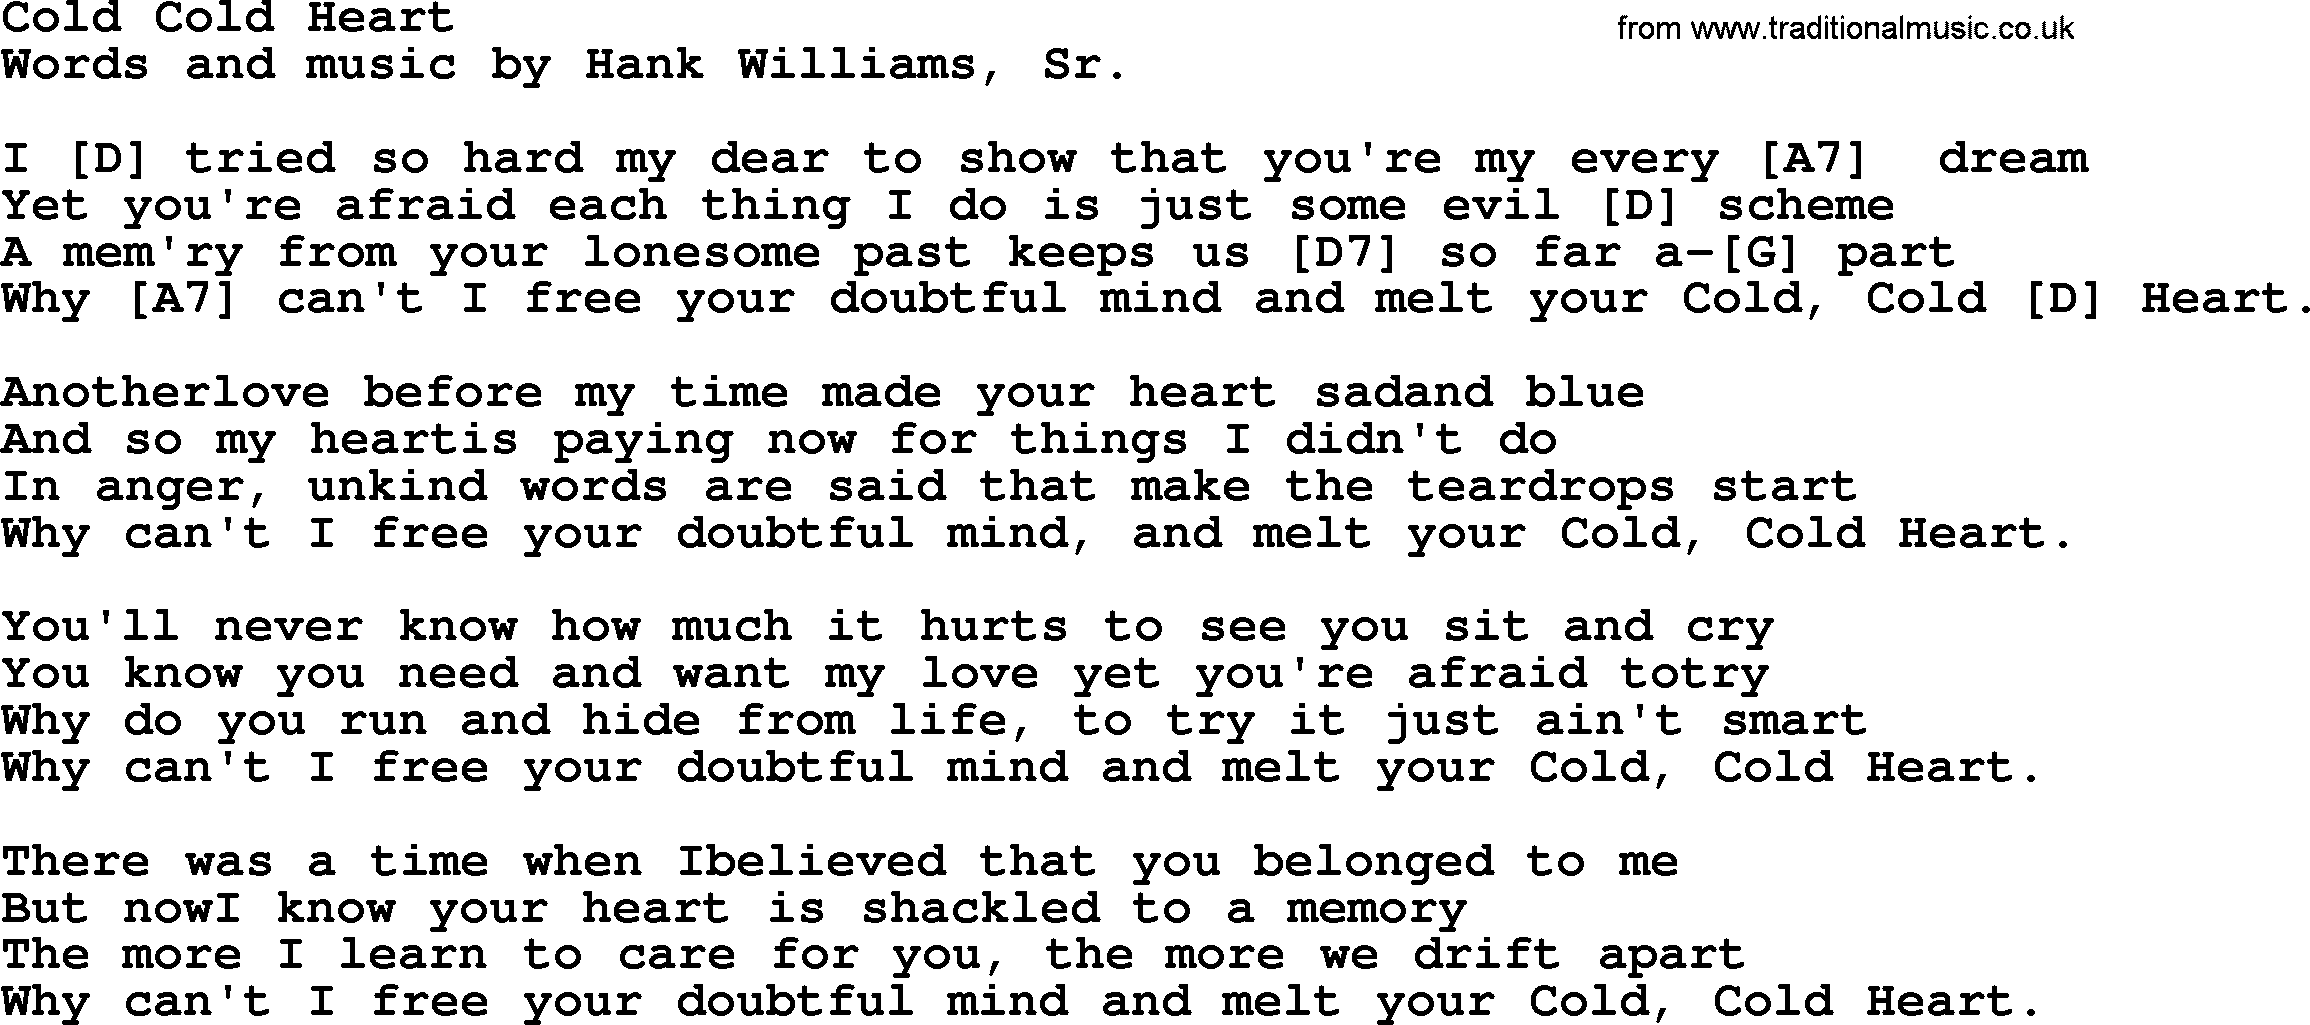 Hank Williams song Cold Cold Heart, lyrics and chords